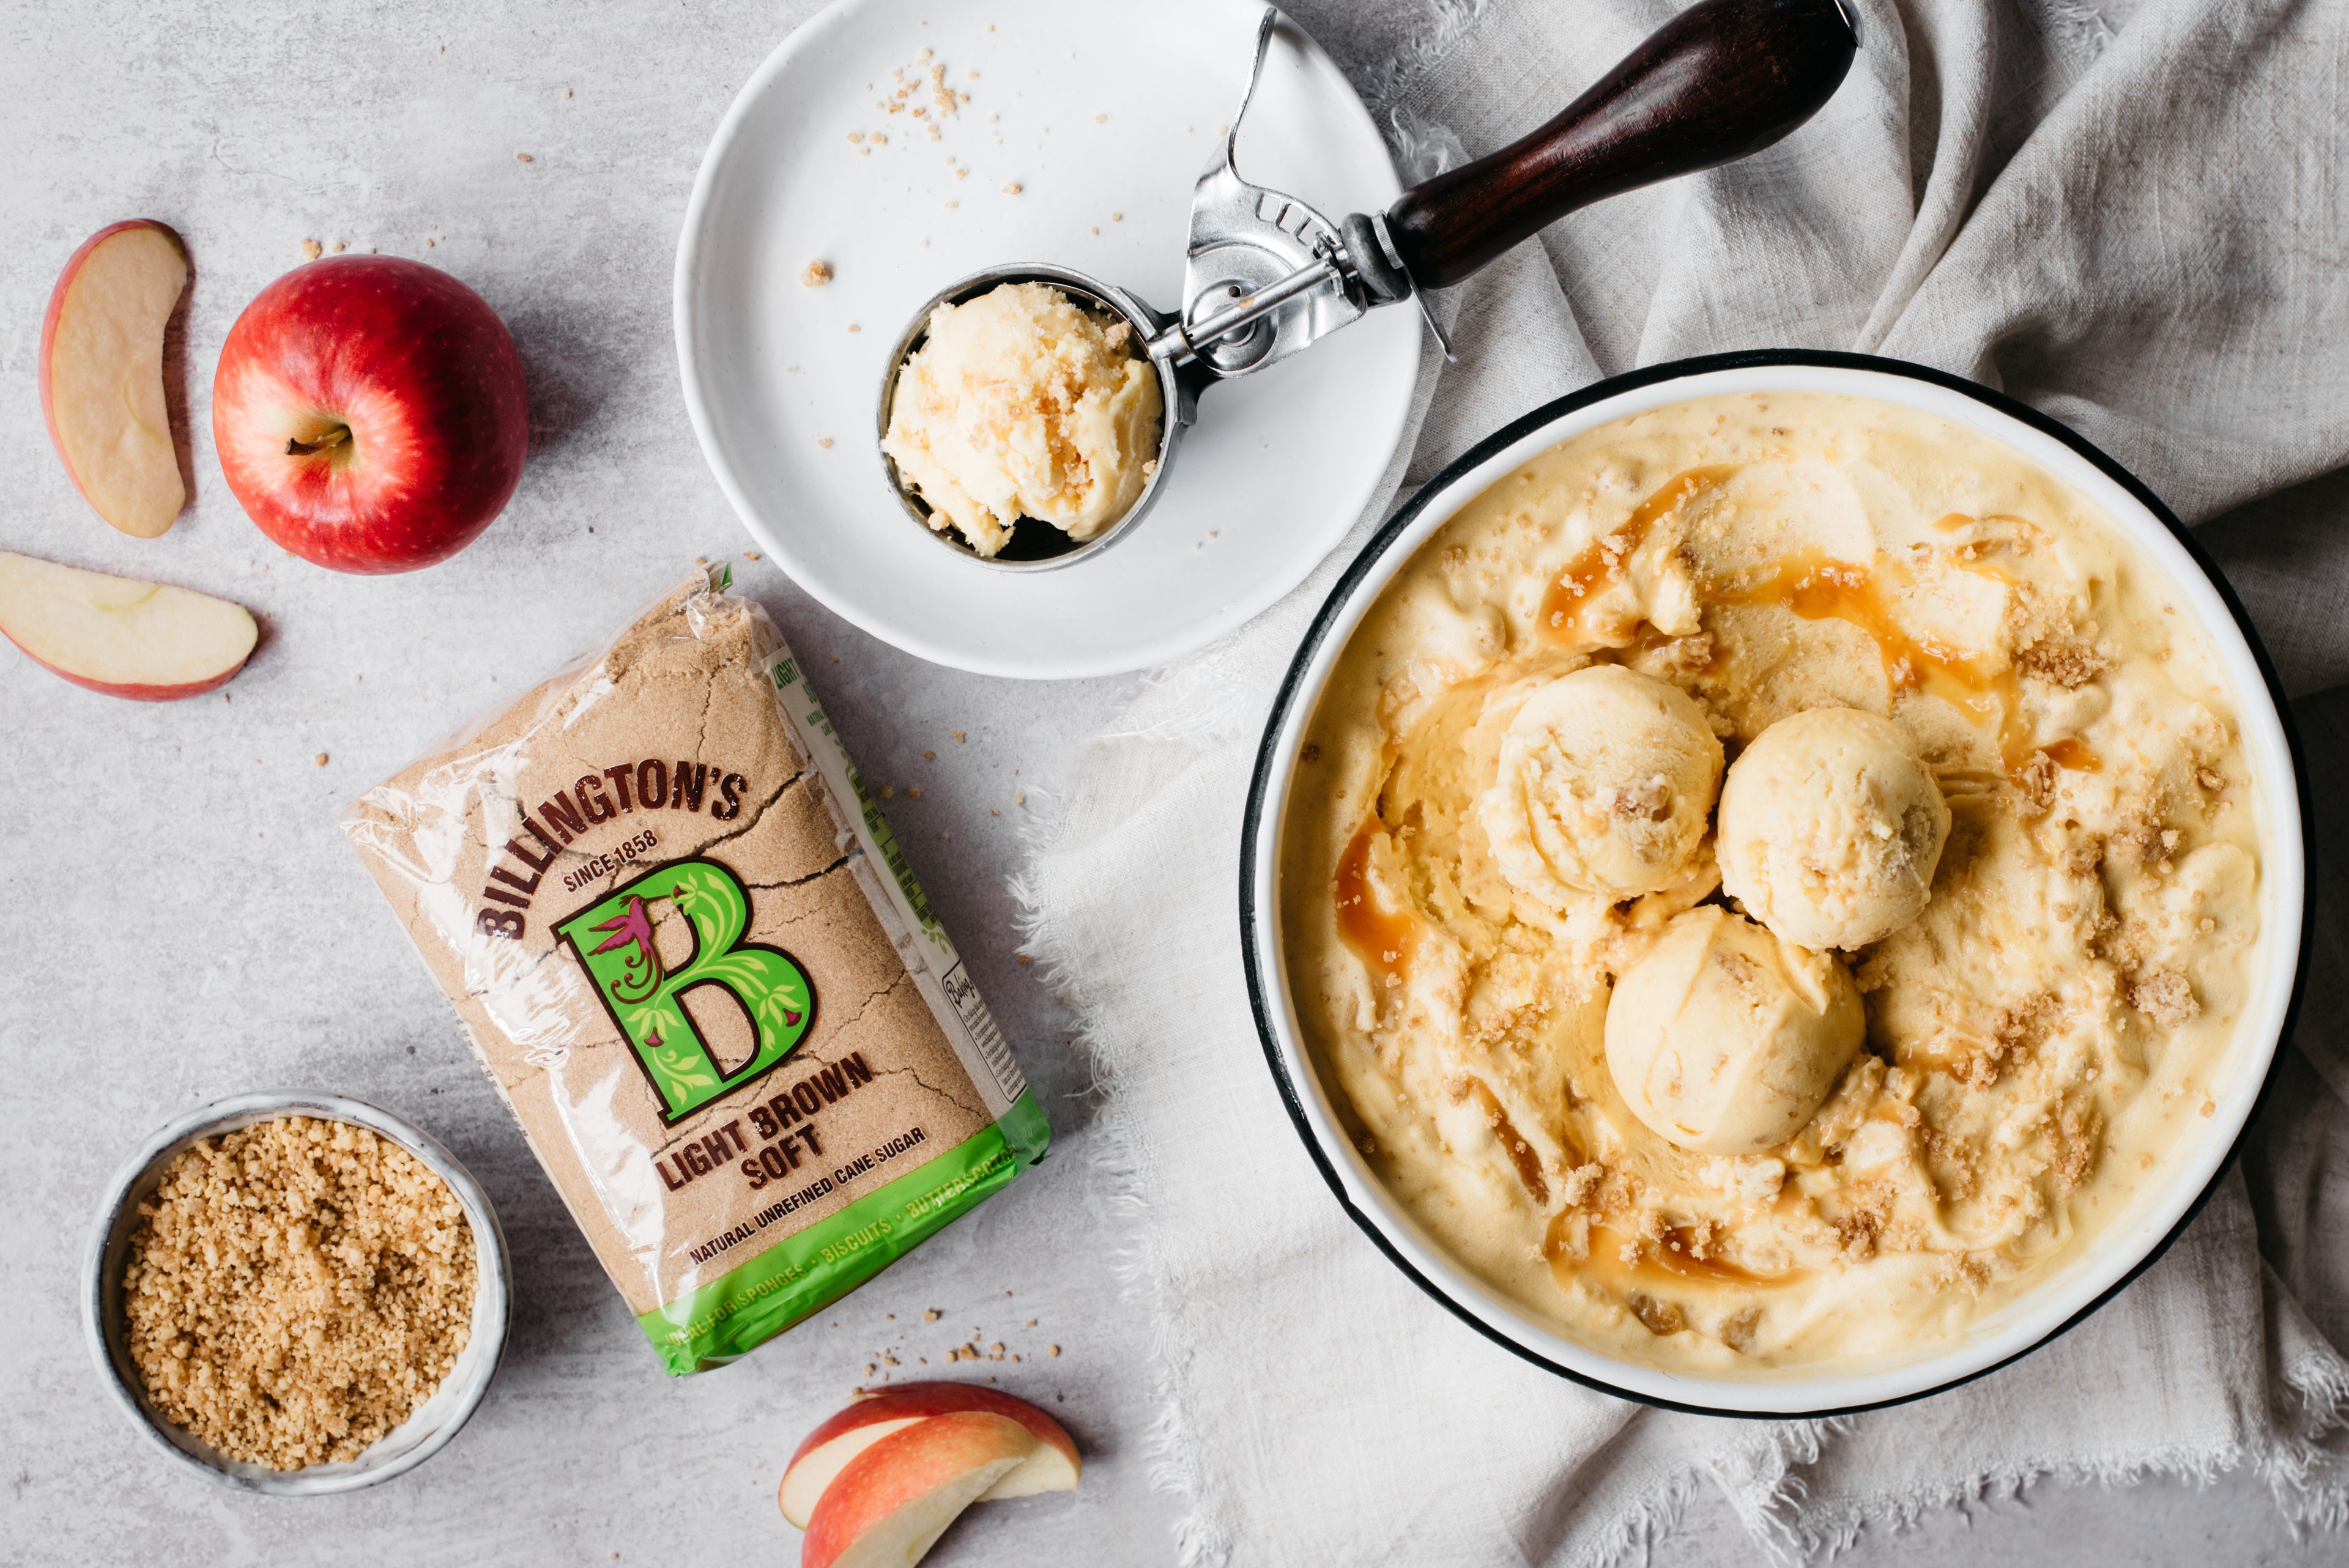 Bowl of ice cream, apple and slices, brown sugar packet